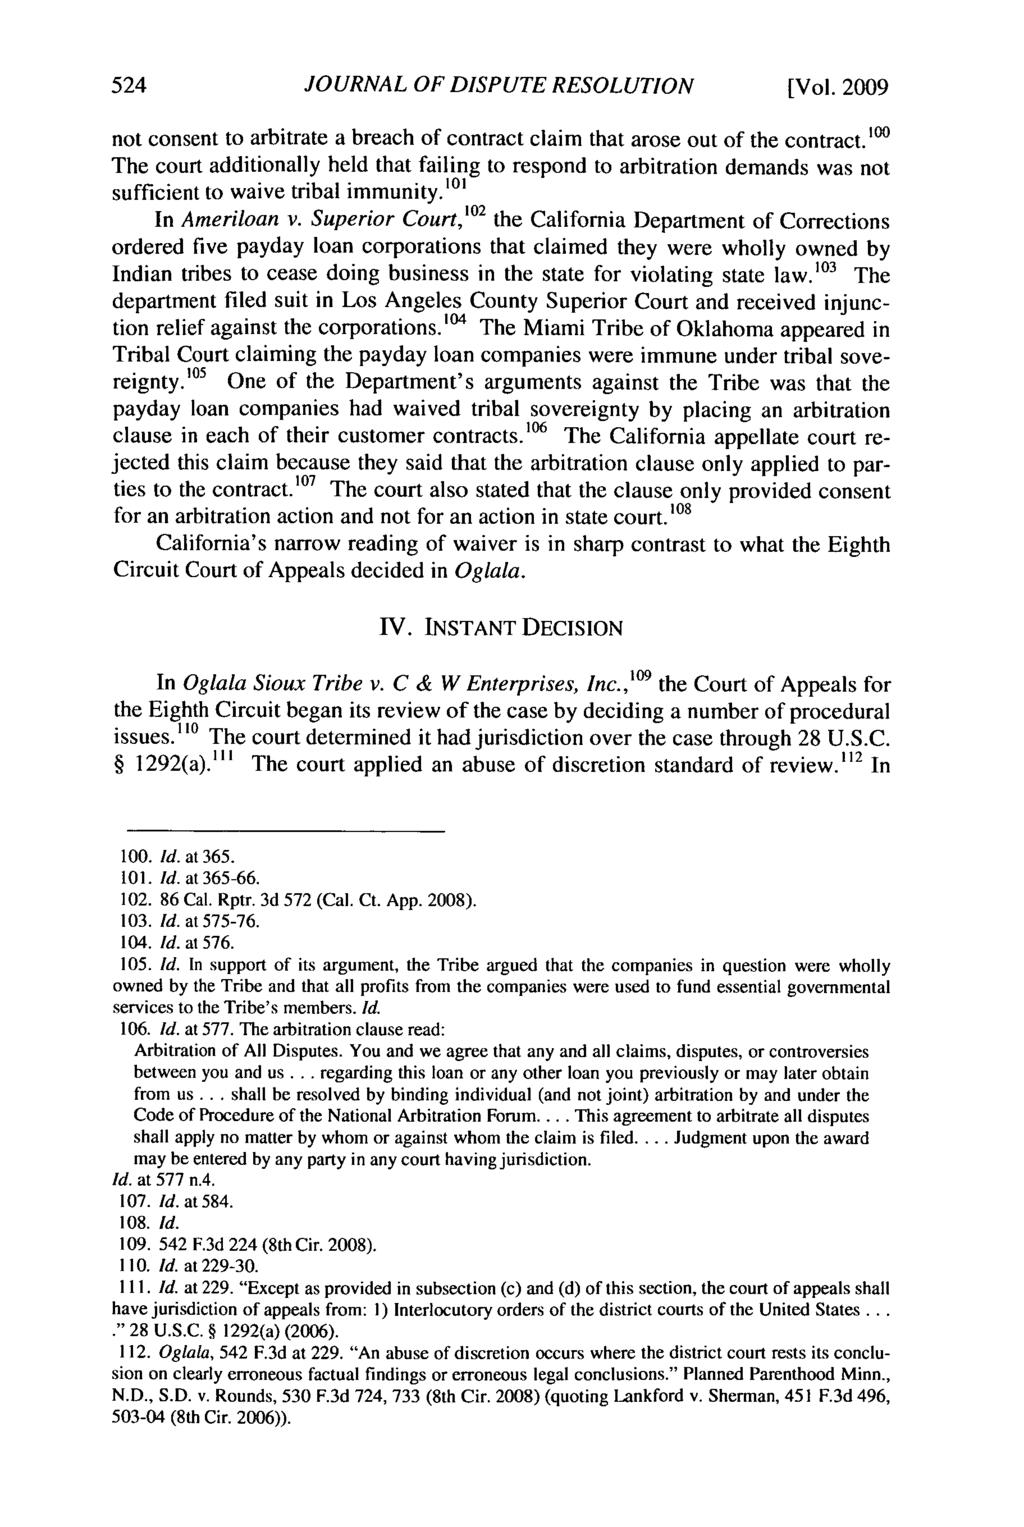 Journal of Dispute Resolution, Vol. 2009, Iss. 2 [2009], Art. 11 JOURNAL OF DISPUTE RESOLUTION [Vol. 2009 not consent to arbitrate a breach of contract claim that arose out of the contract.